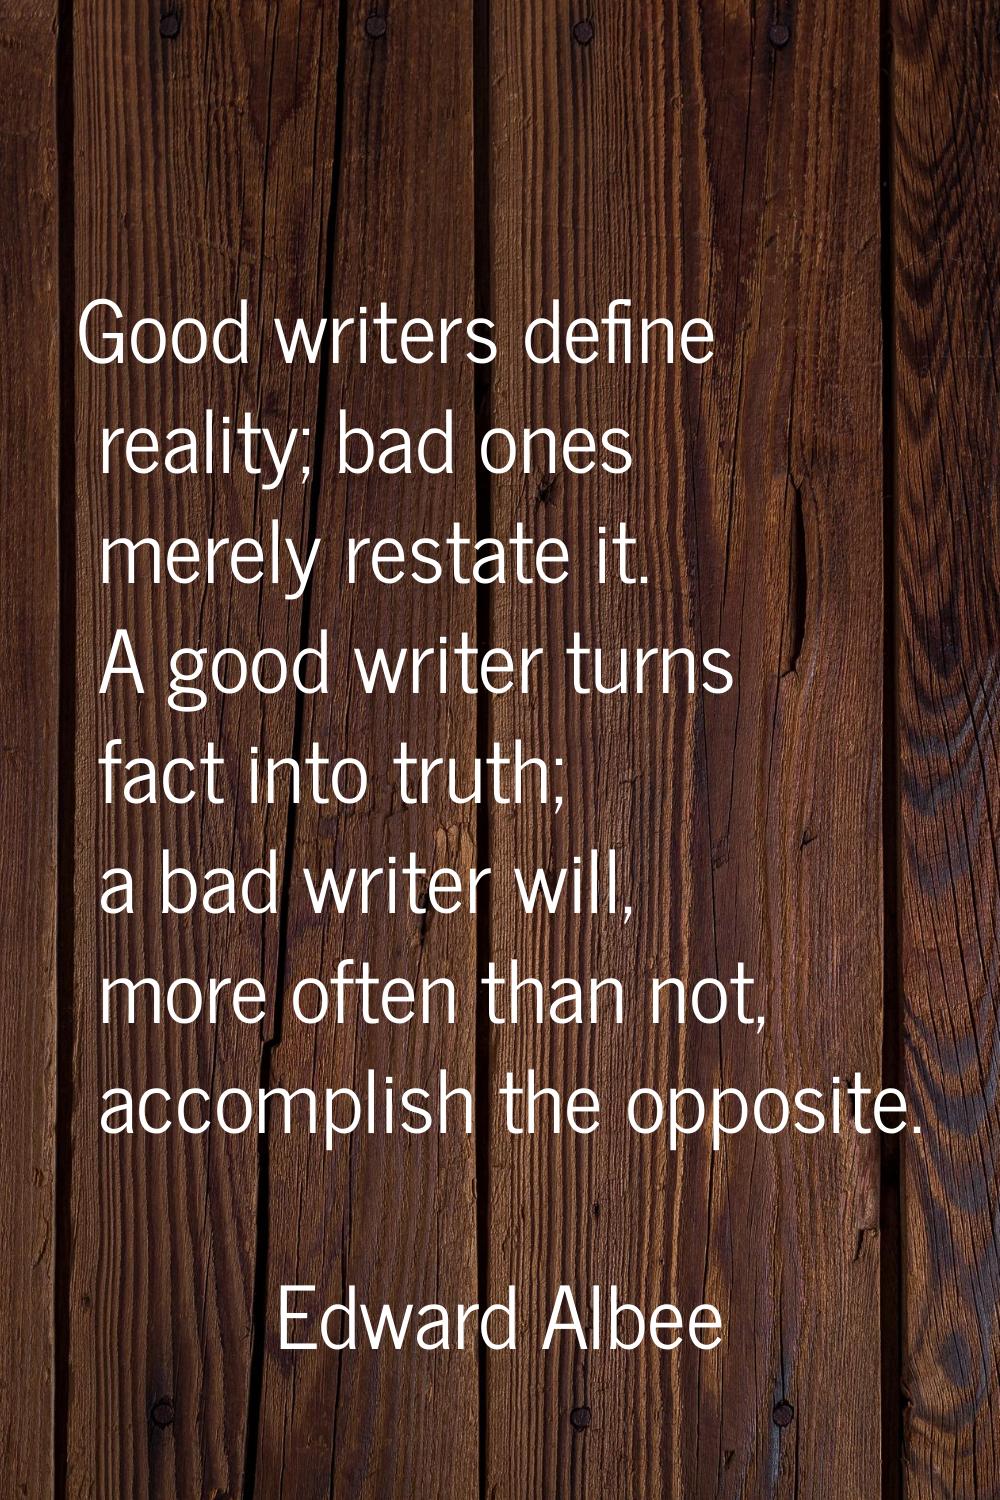 Good writers define reality; bad ones merely restate it. A good writer turns fact into truth; a bad